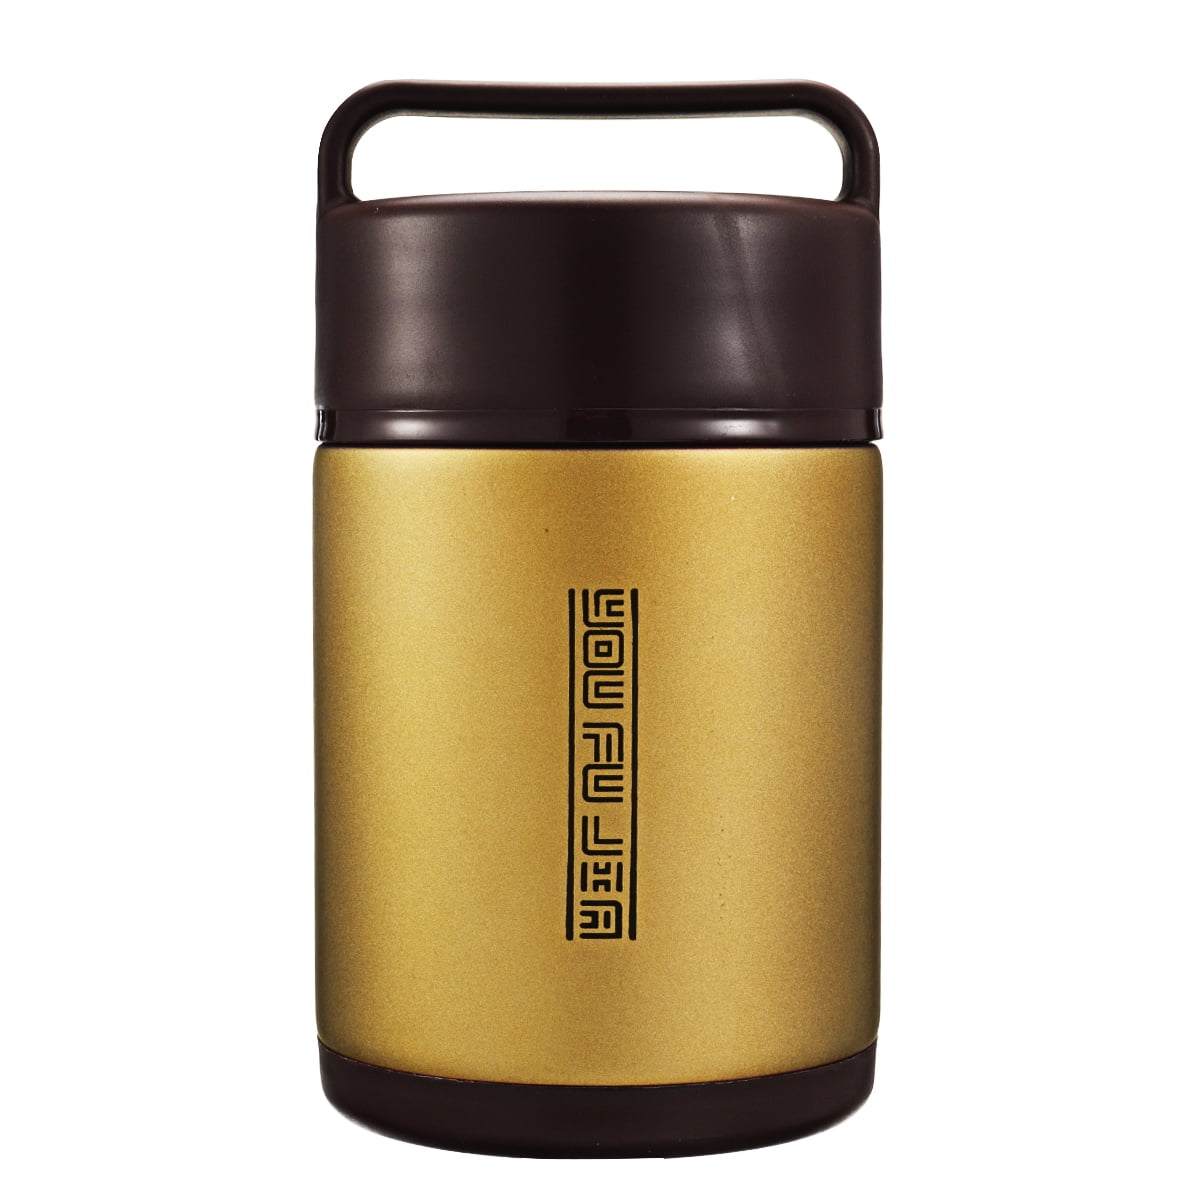 kids hot food thermos